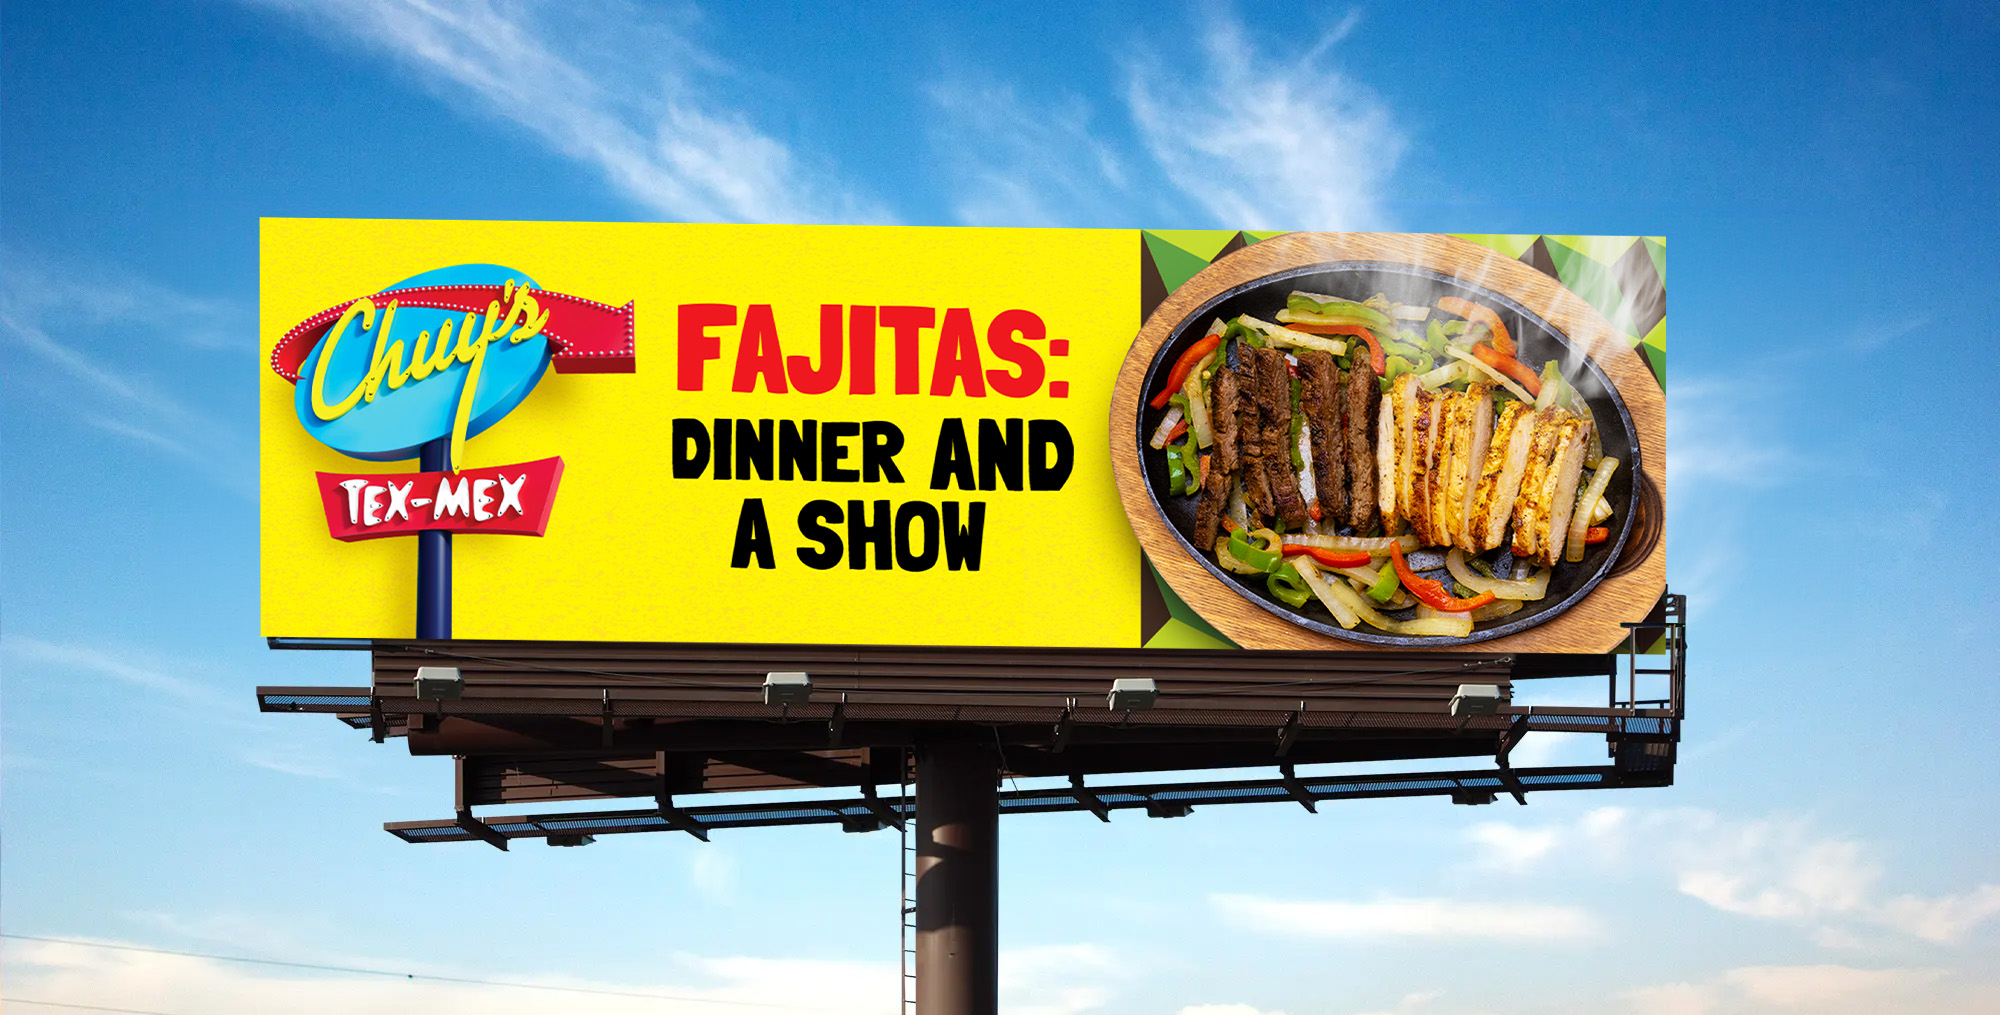 Chuy's billboard that reads "Fajitas: dinner and a show"